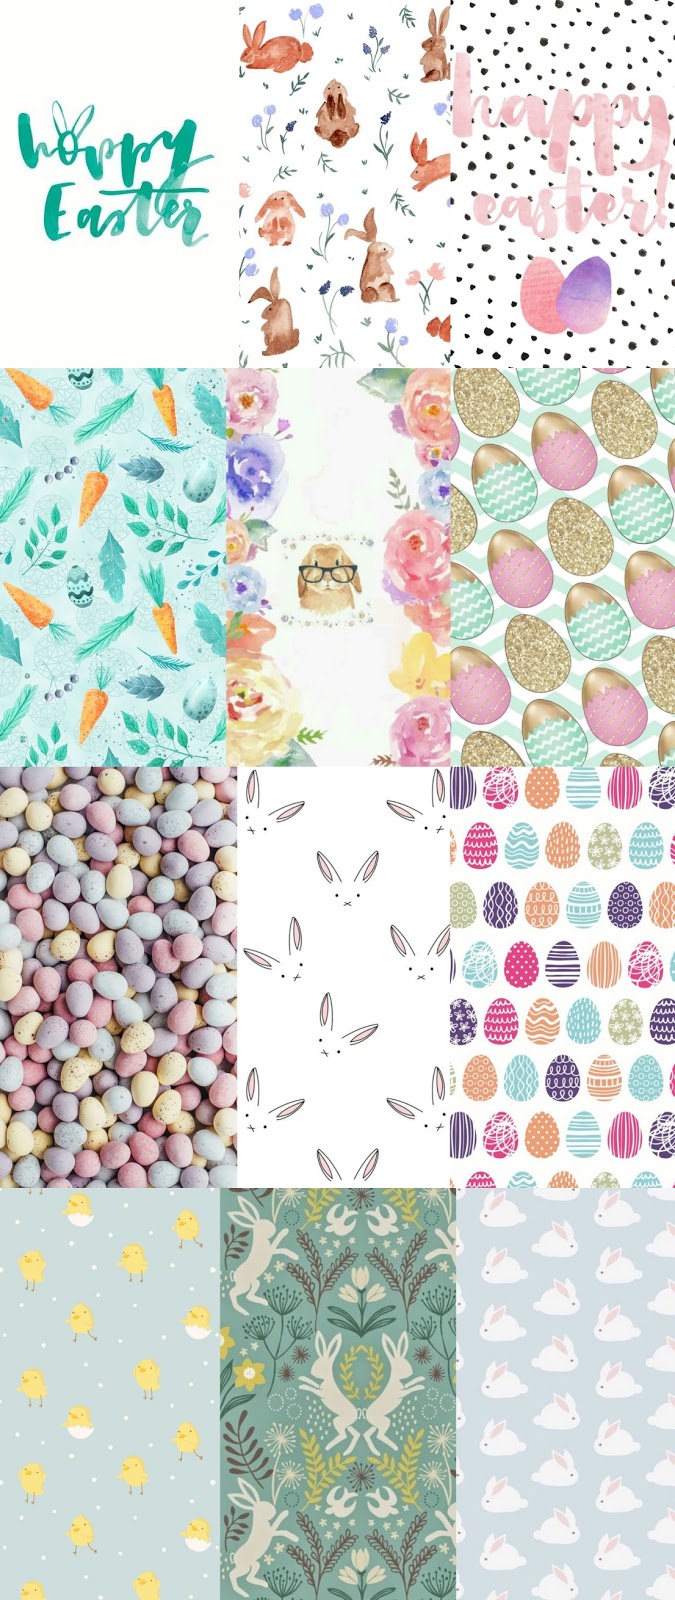 12 Easter Themed Phone Wallpapers - Quilt , HD Wallpaper & Backgrounds